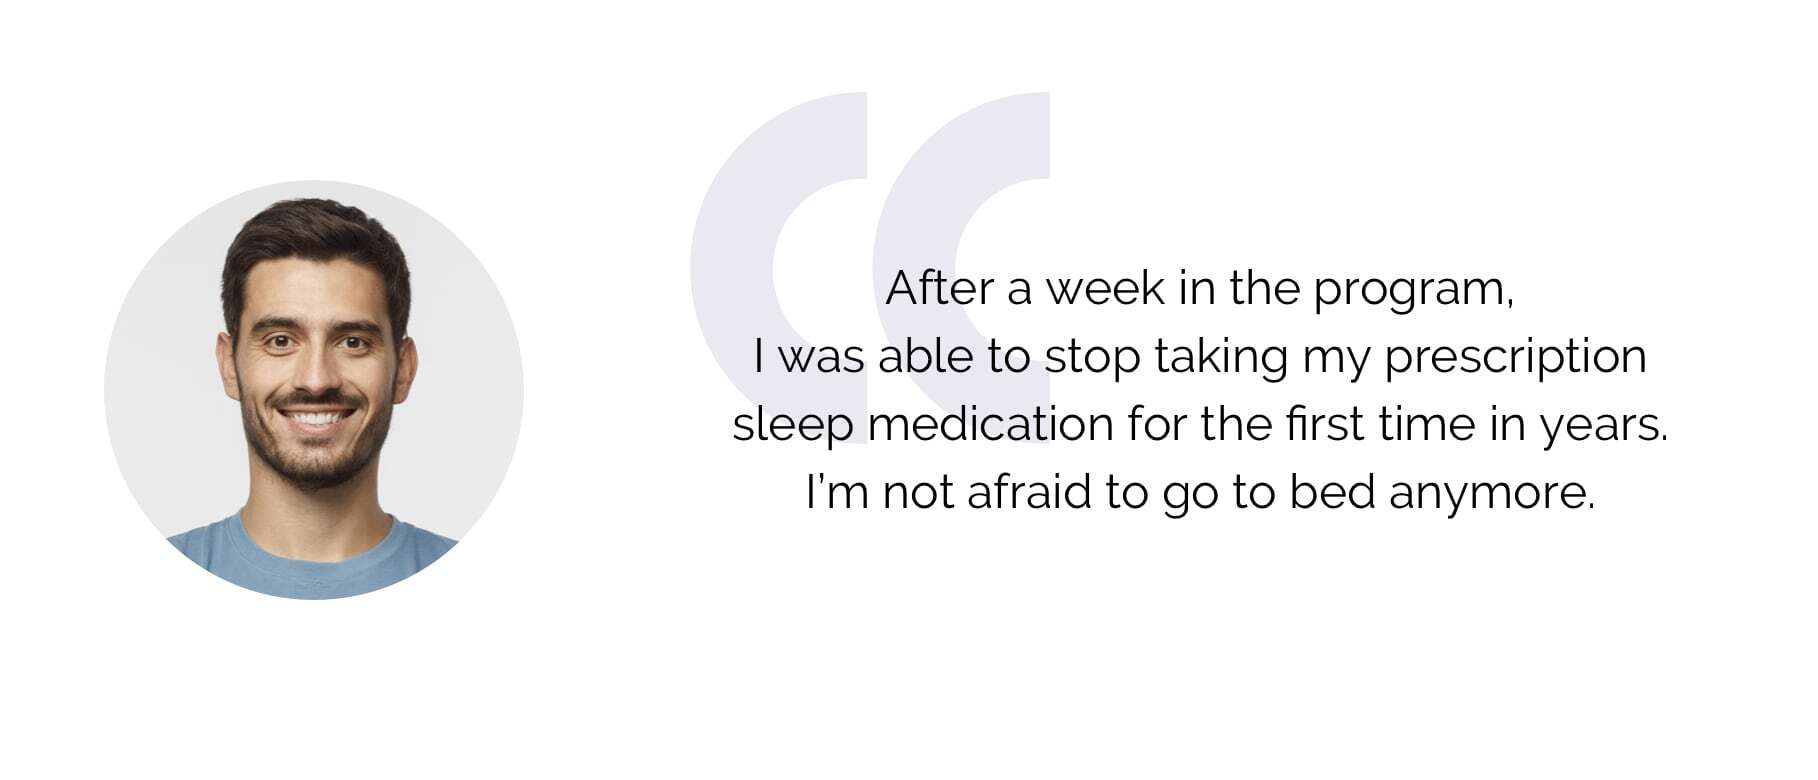 A testimonial showcasing a member who was able to stop taking sleeping pills using a Goodpath program.